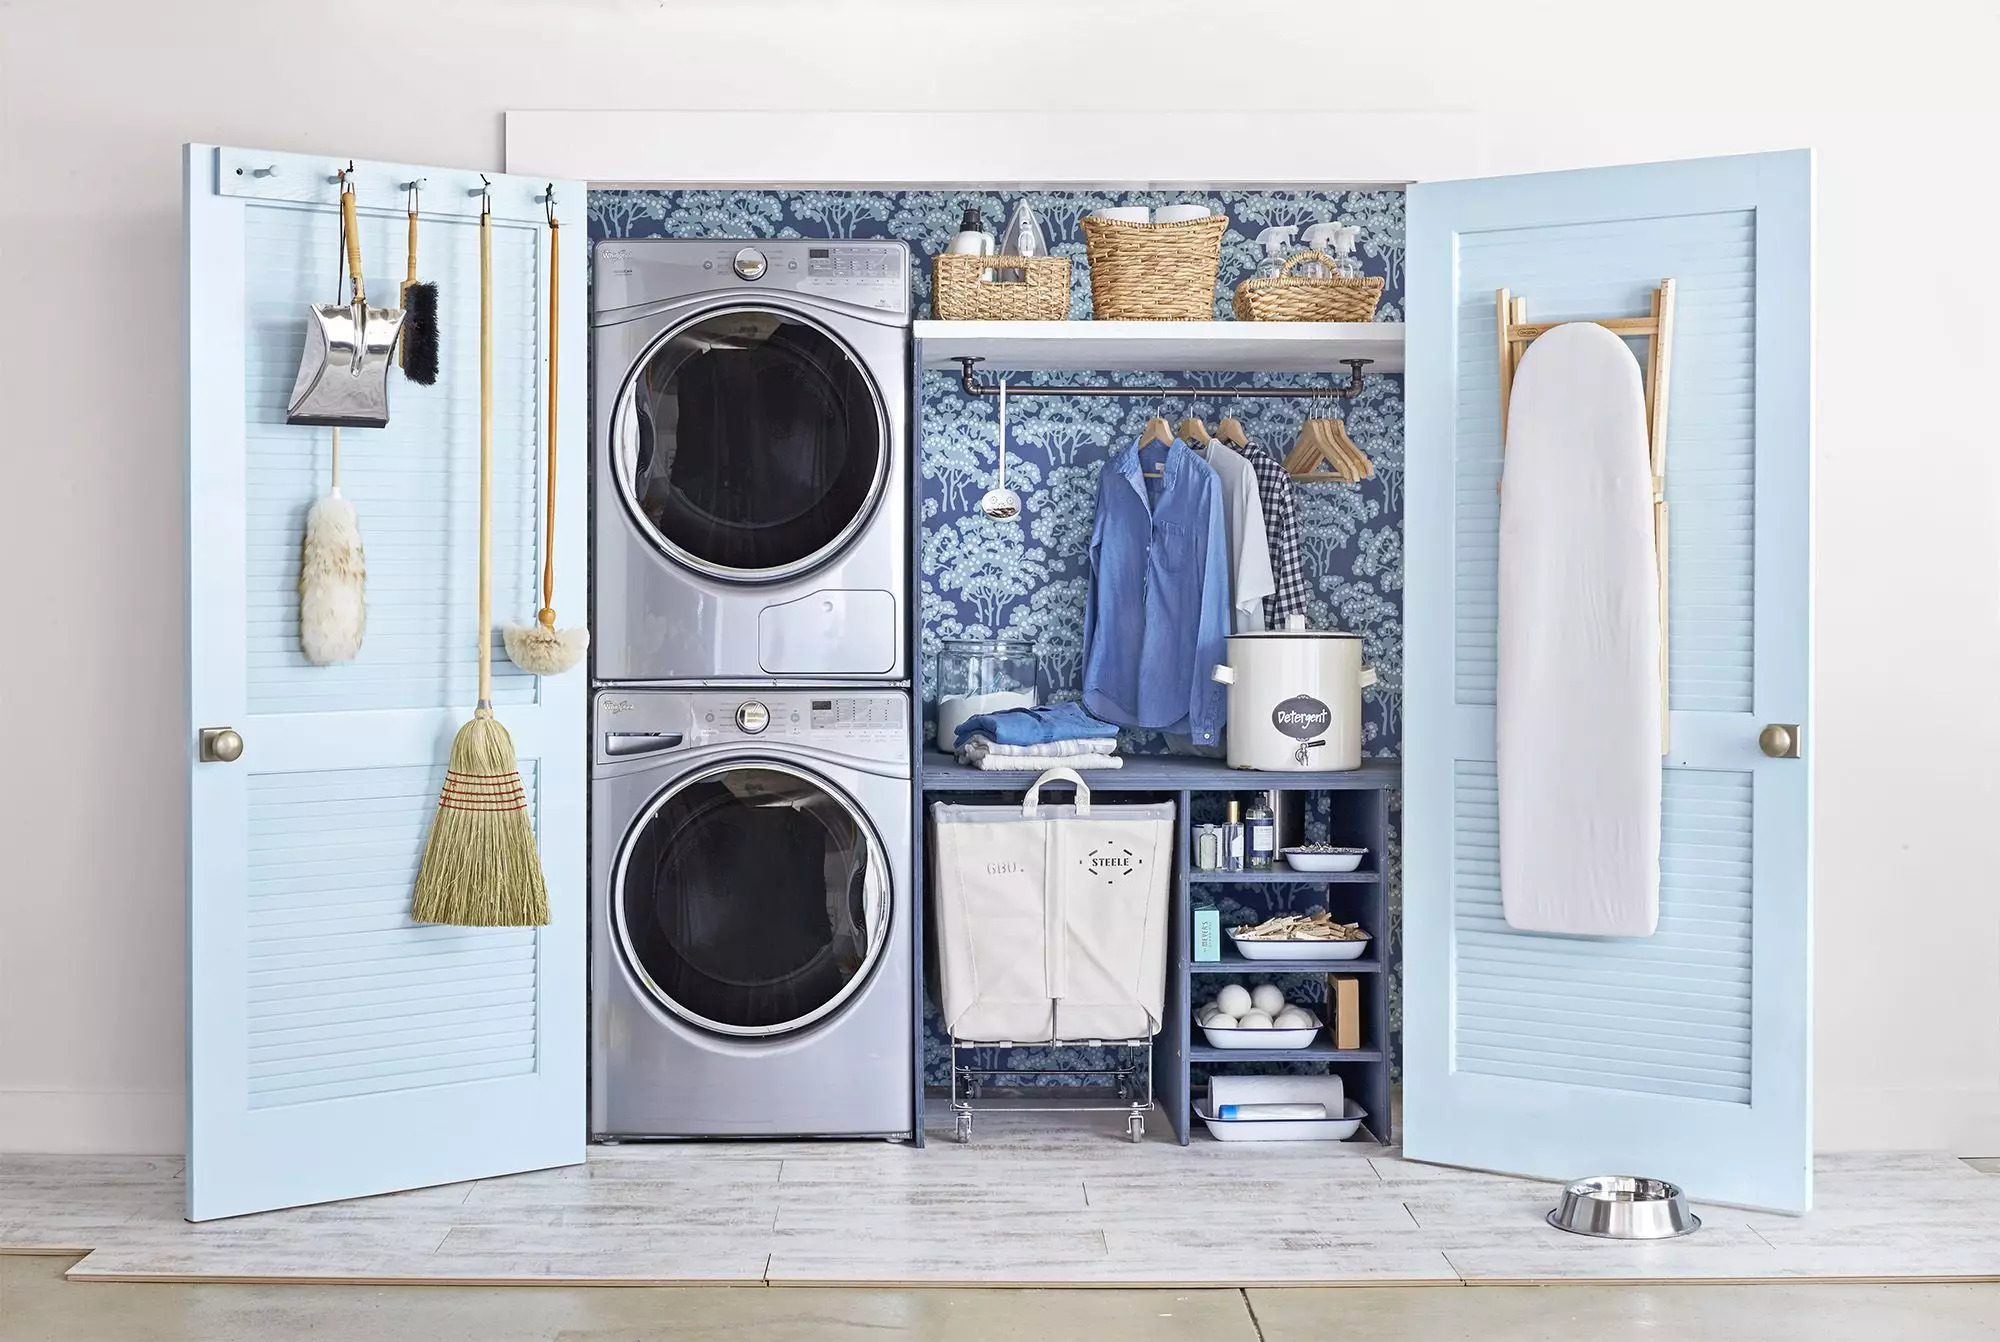 20 Decor Ideas to Make the Laundry Room Your Favorite Place in the Home